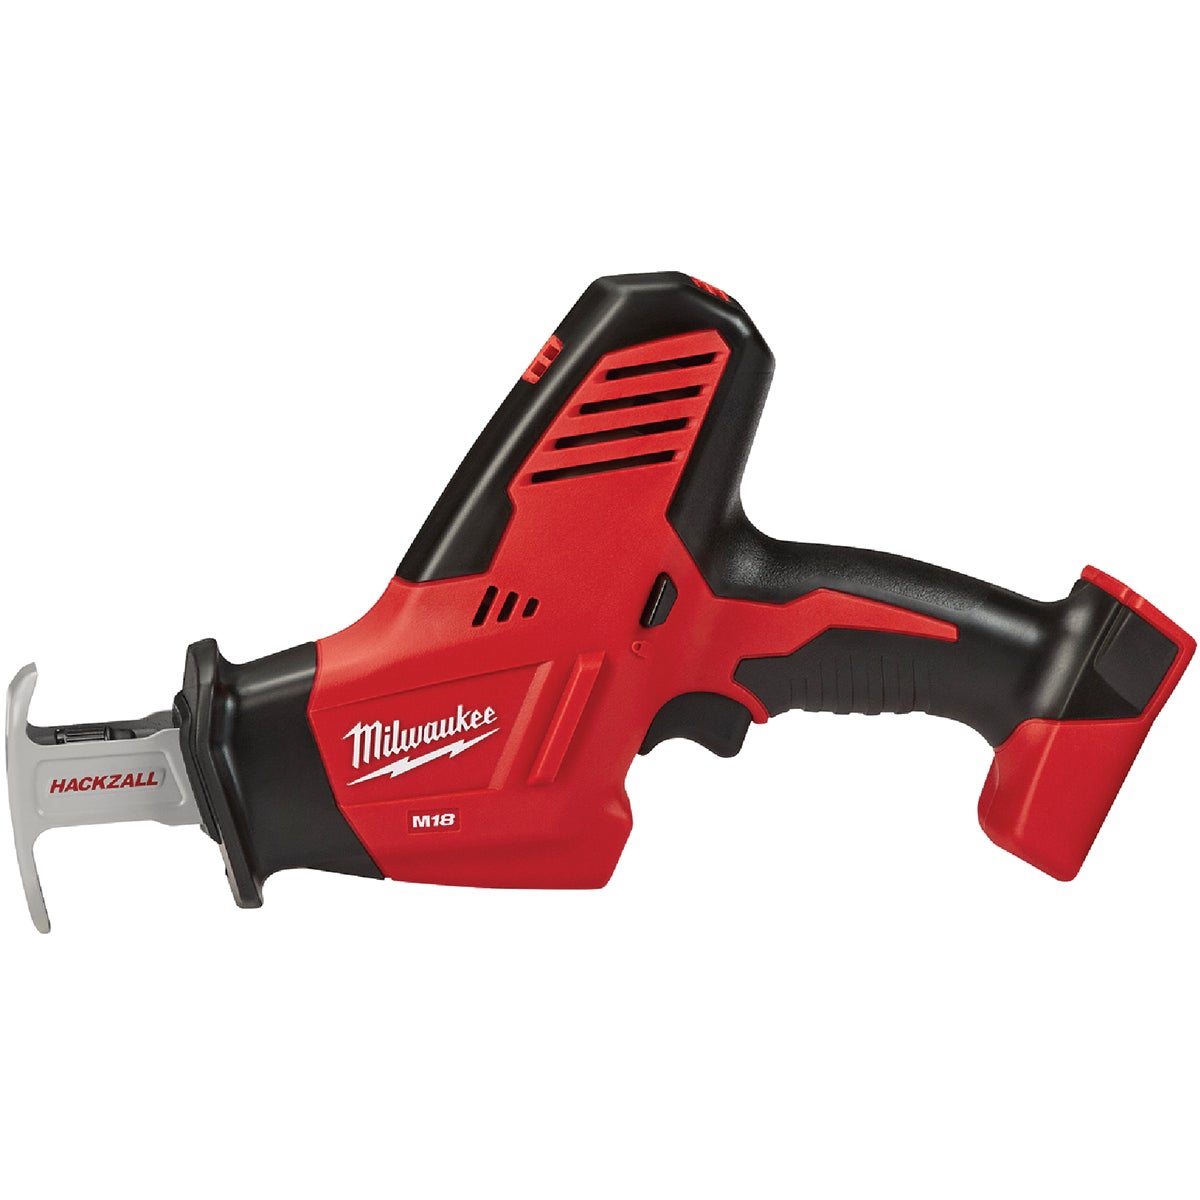 Milwaukee HACKZALL M18 18-Volt Lithium-Ion Cordless Reciprocating Saw (Tool Only)